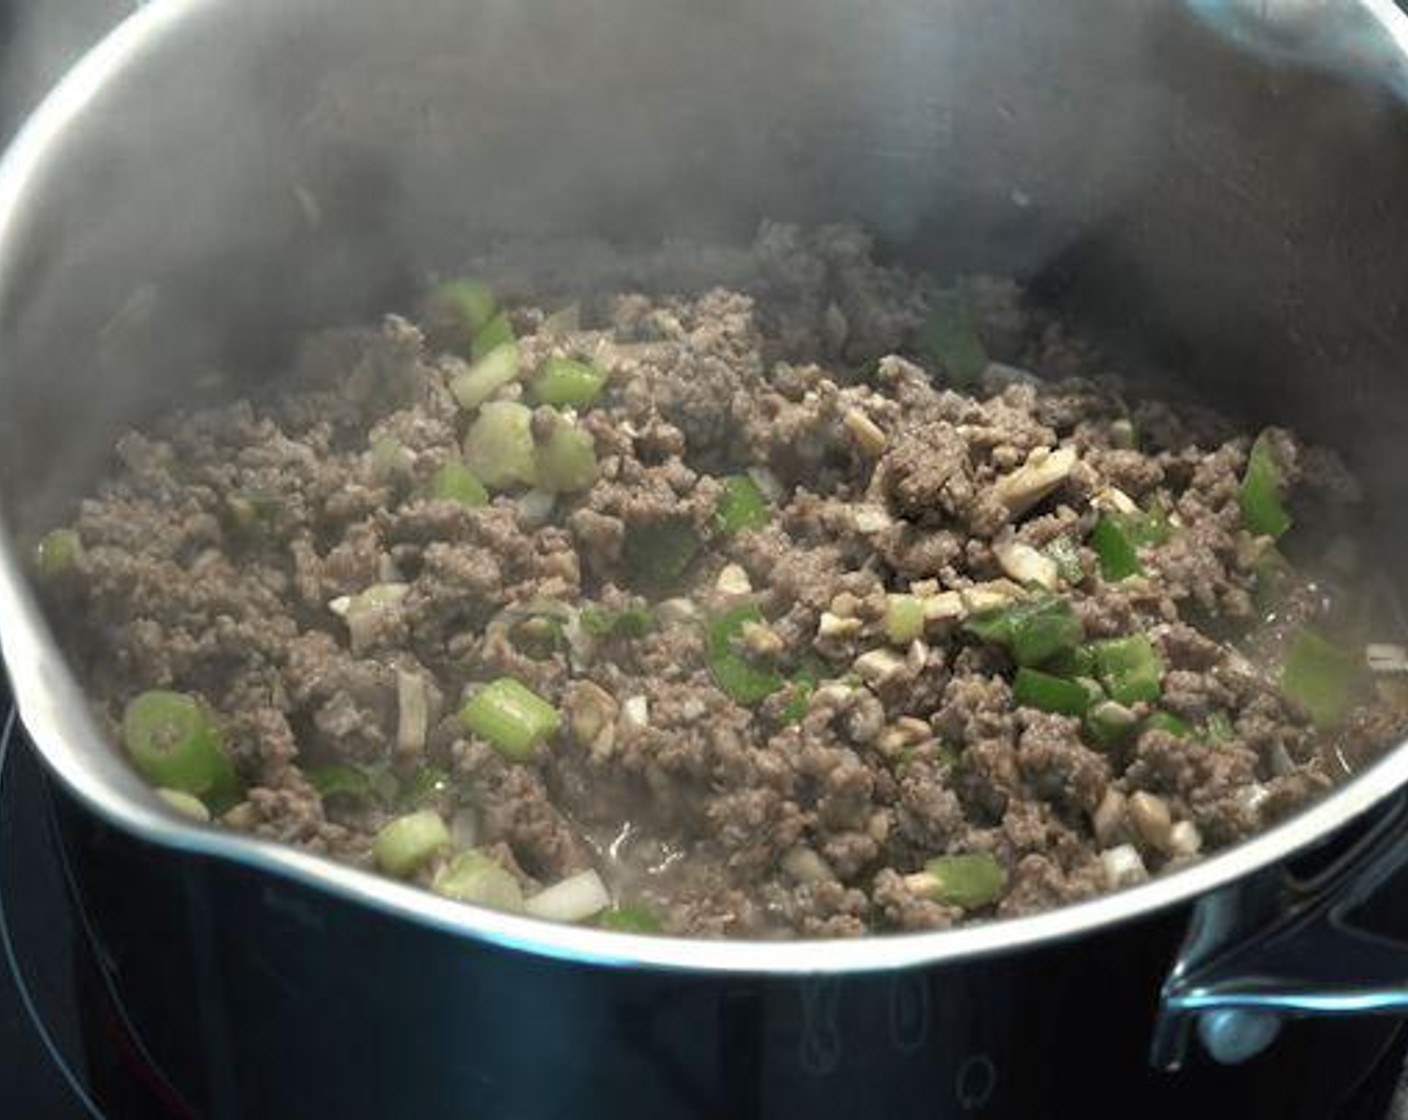 step 3 While beef is cooking add in the Scallion (1 bunch) and Button Mushrooms (6) and stir. Add in Salt (to taste), Ground Black Pepper (to taste), Dried Thyme (1/2 Tbsp) and Worcestershire Sauce (1 Tbsp) then continue to stir.